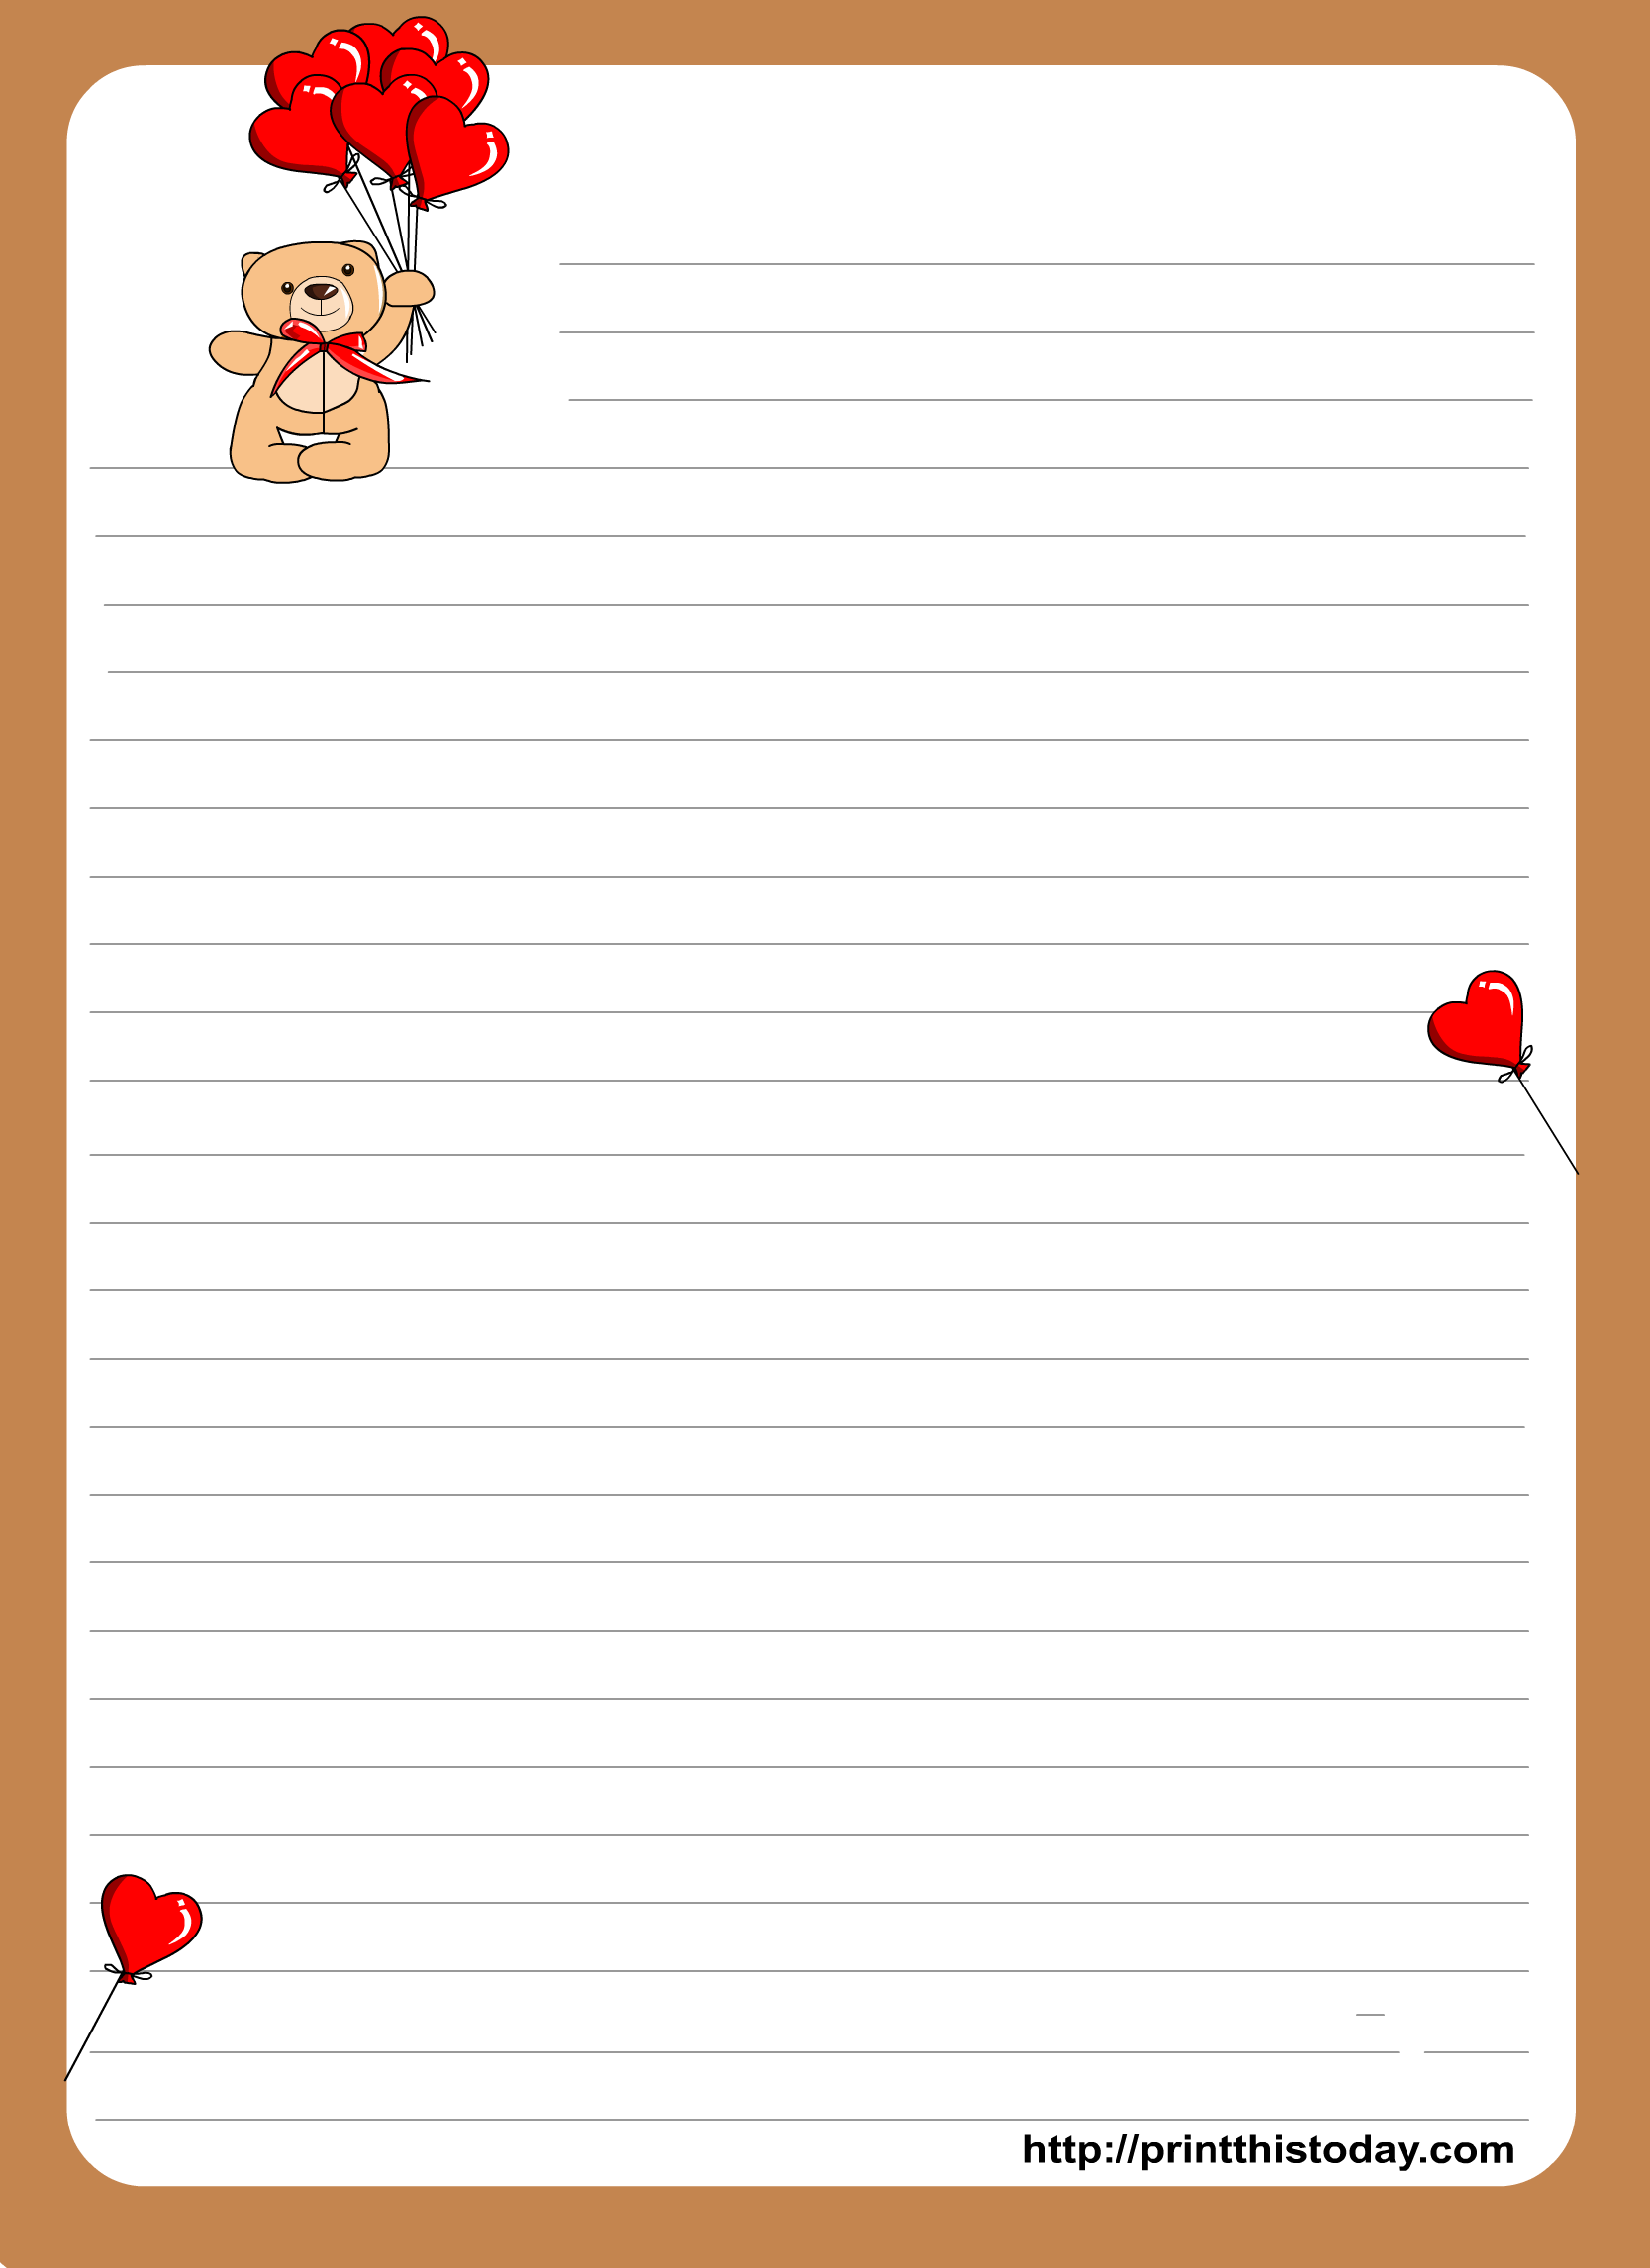 9 Best Images of Love Letter Stationery Printable - Printable Love ...